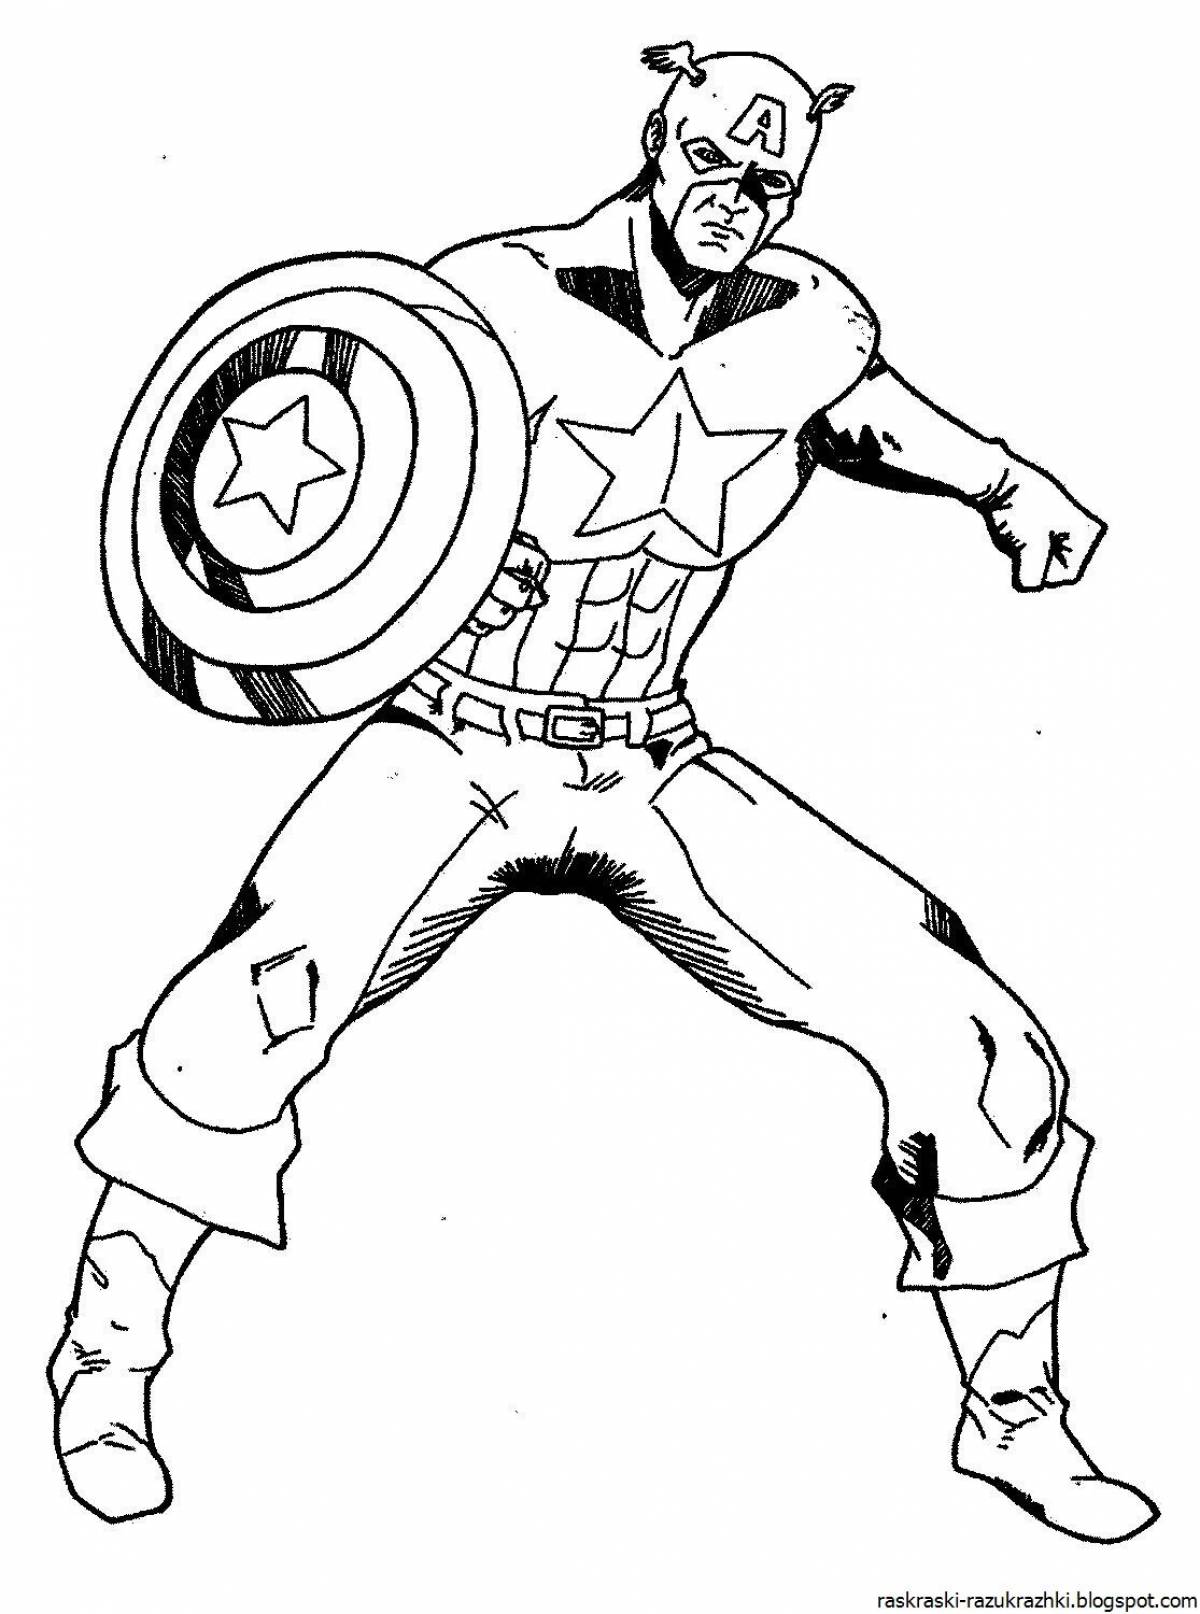 Adorable Captain America coloring book for kids